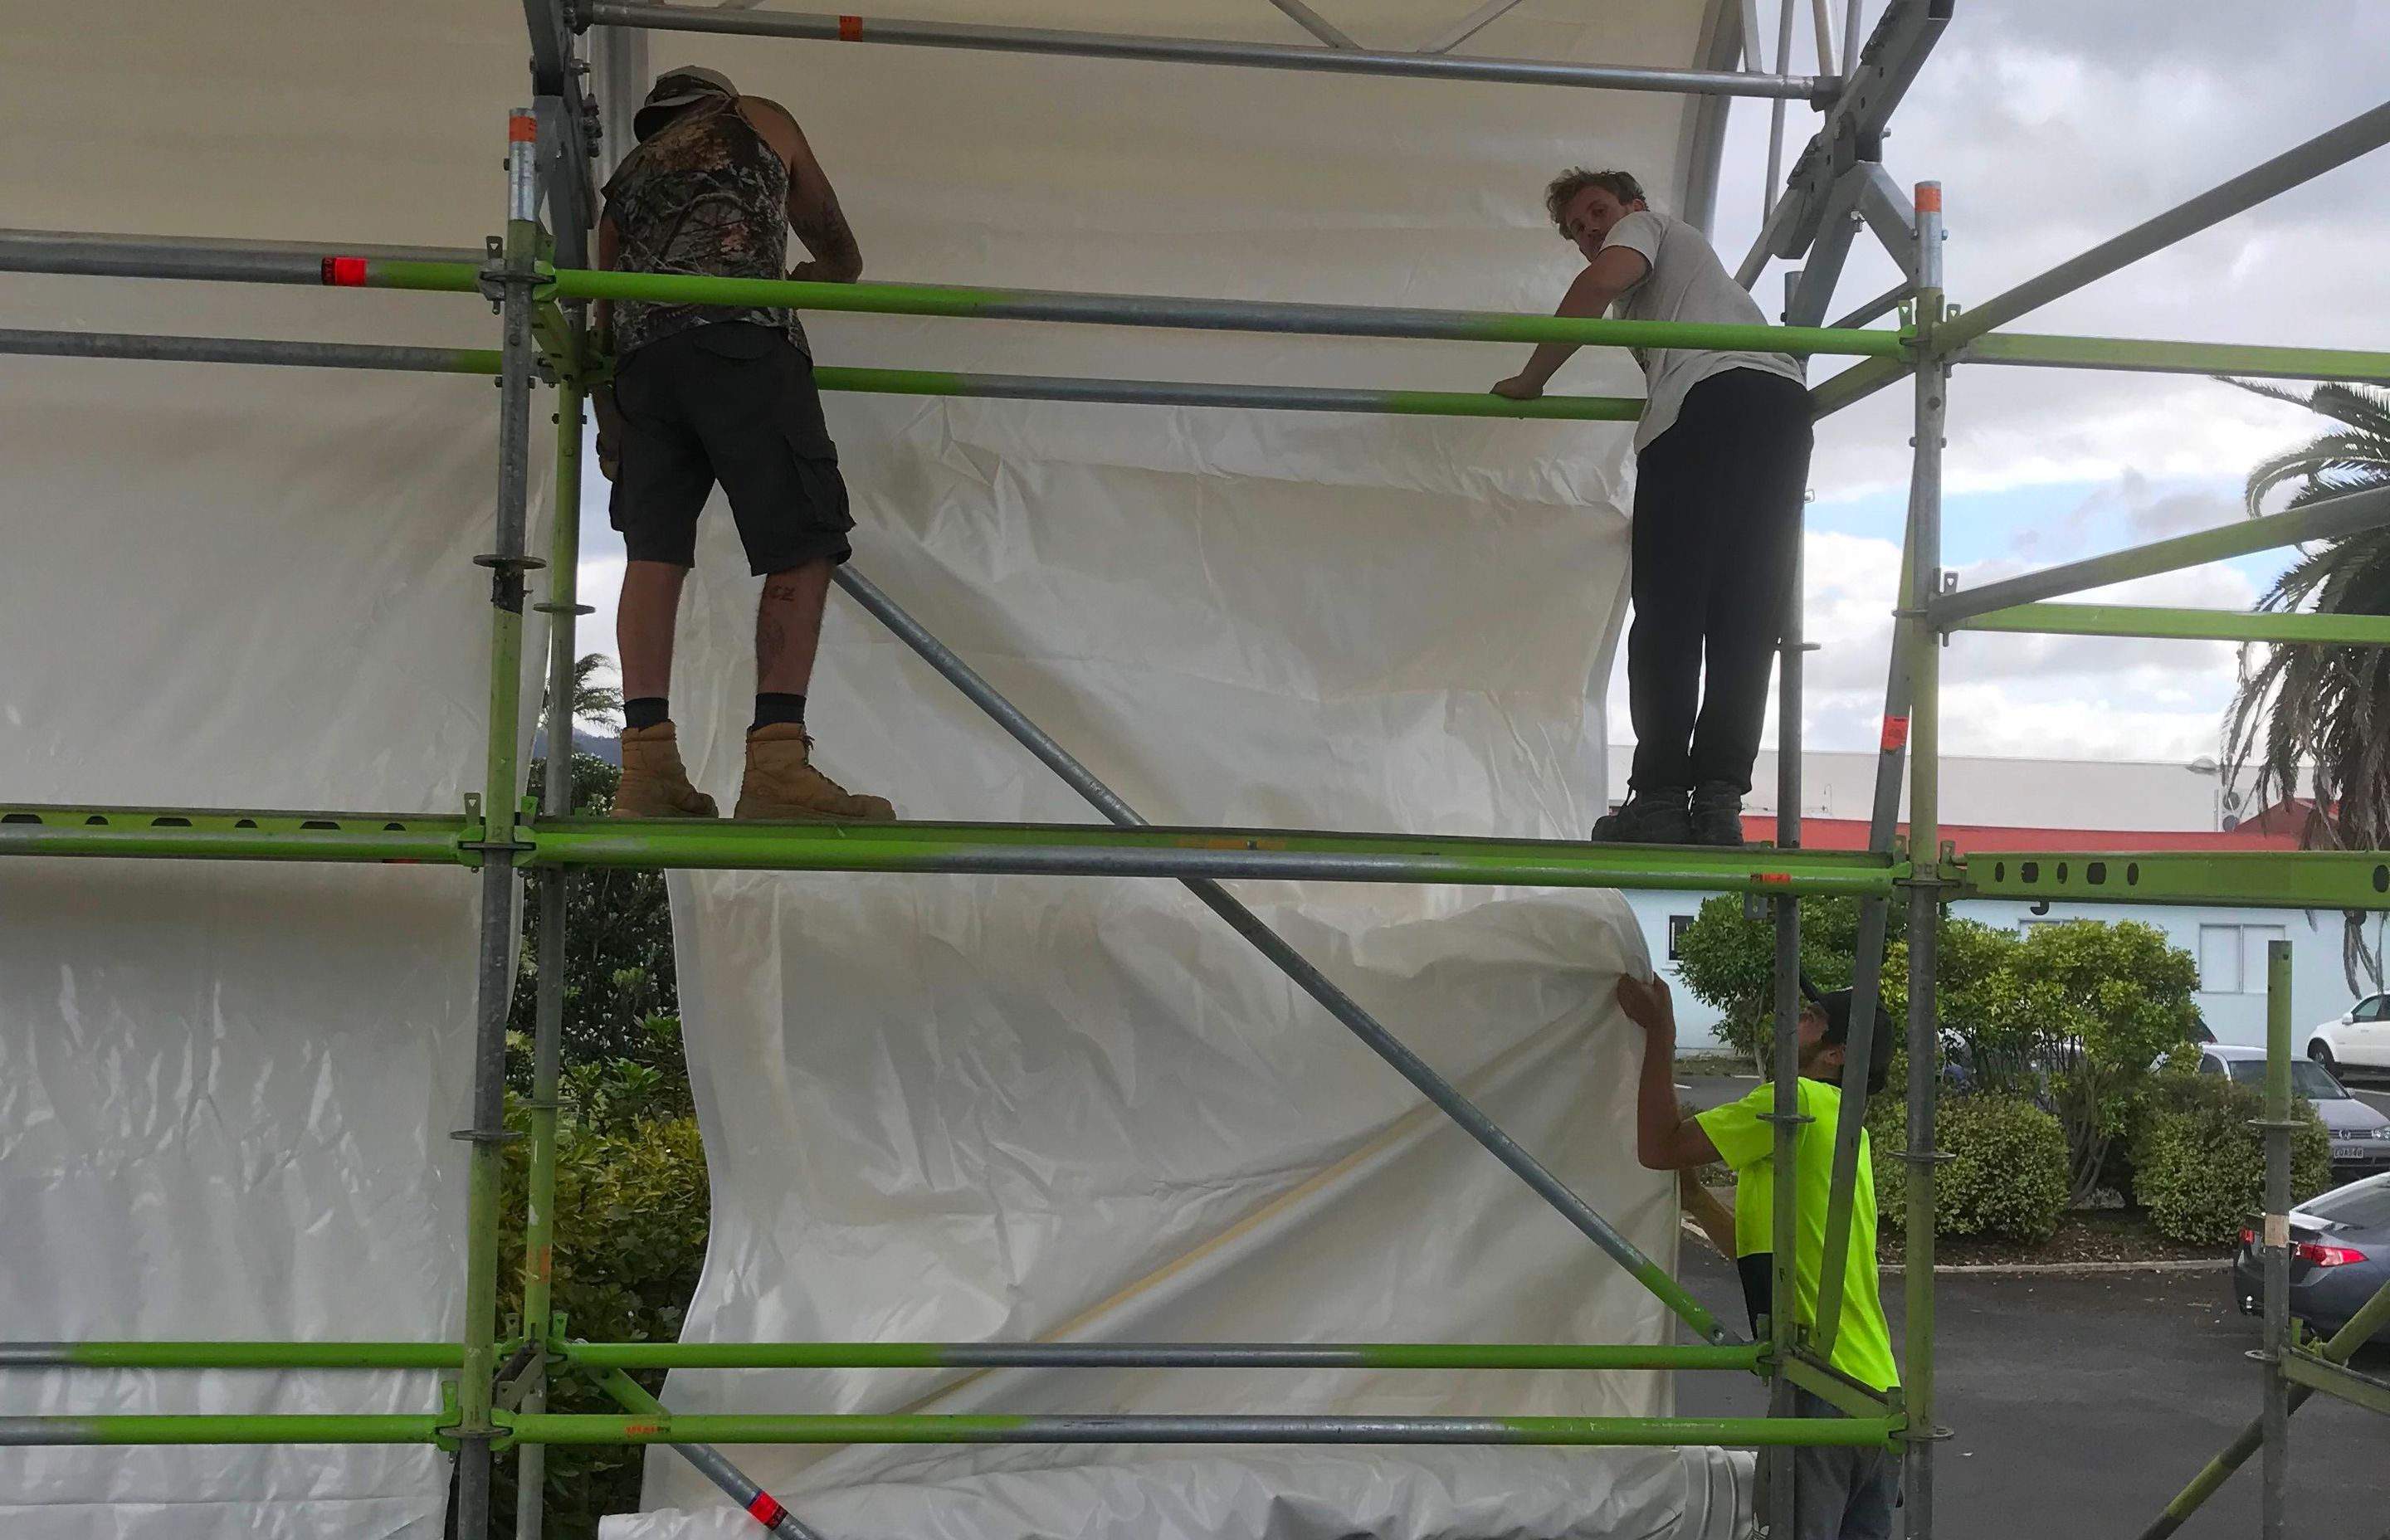 PVC roof &amp; wall tarpaulins are inserted safely (by pulling through a track). There is no need for personnel to work on top of the structure. These roof and wall tarpaulins are environmentally friendly, as they are reusable and reduce landfill shrinkwrap.